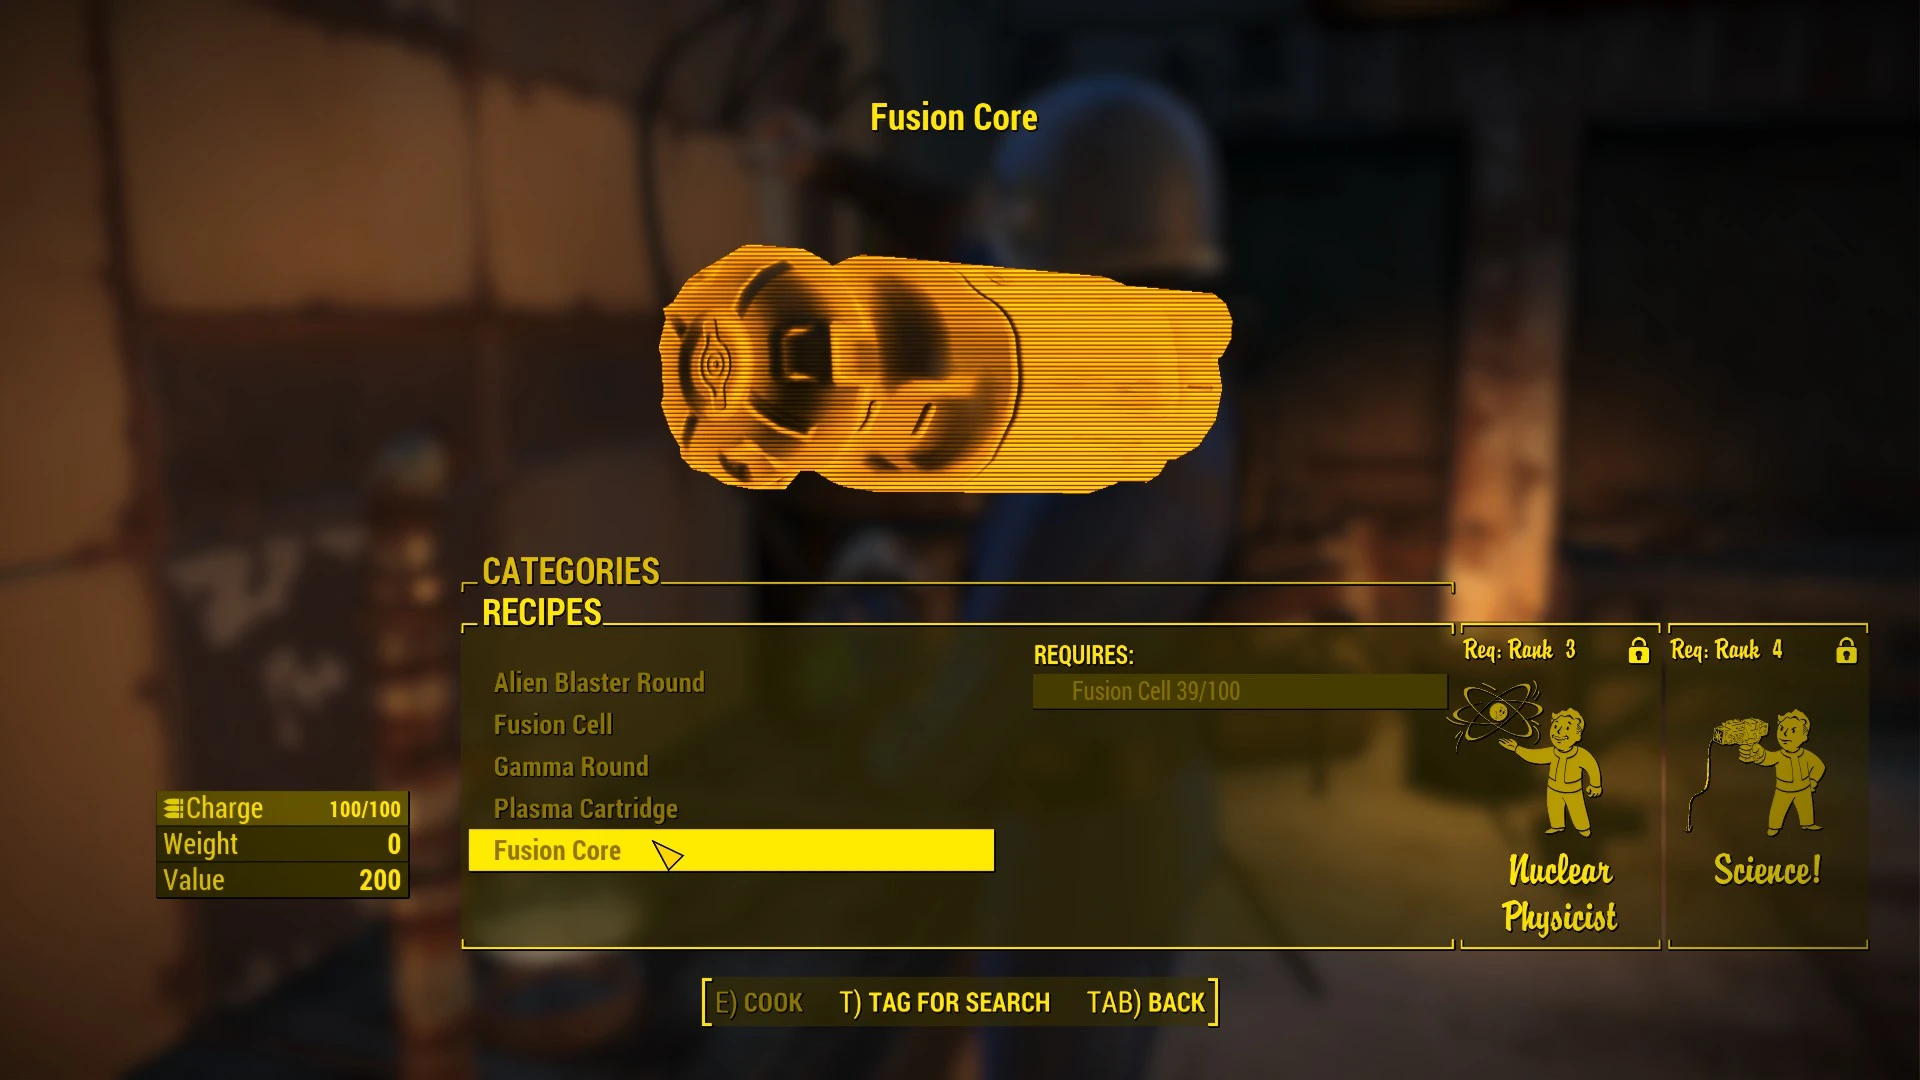 where to find ammo in fallout 4 reddit